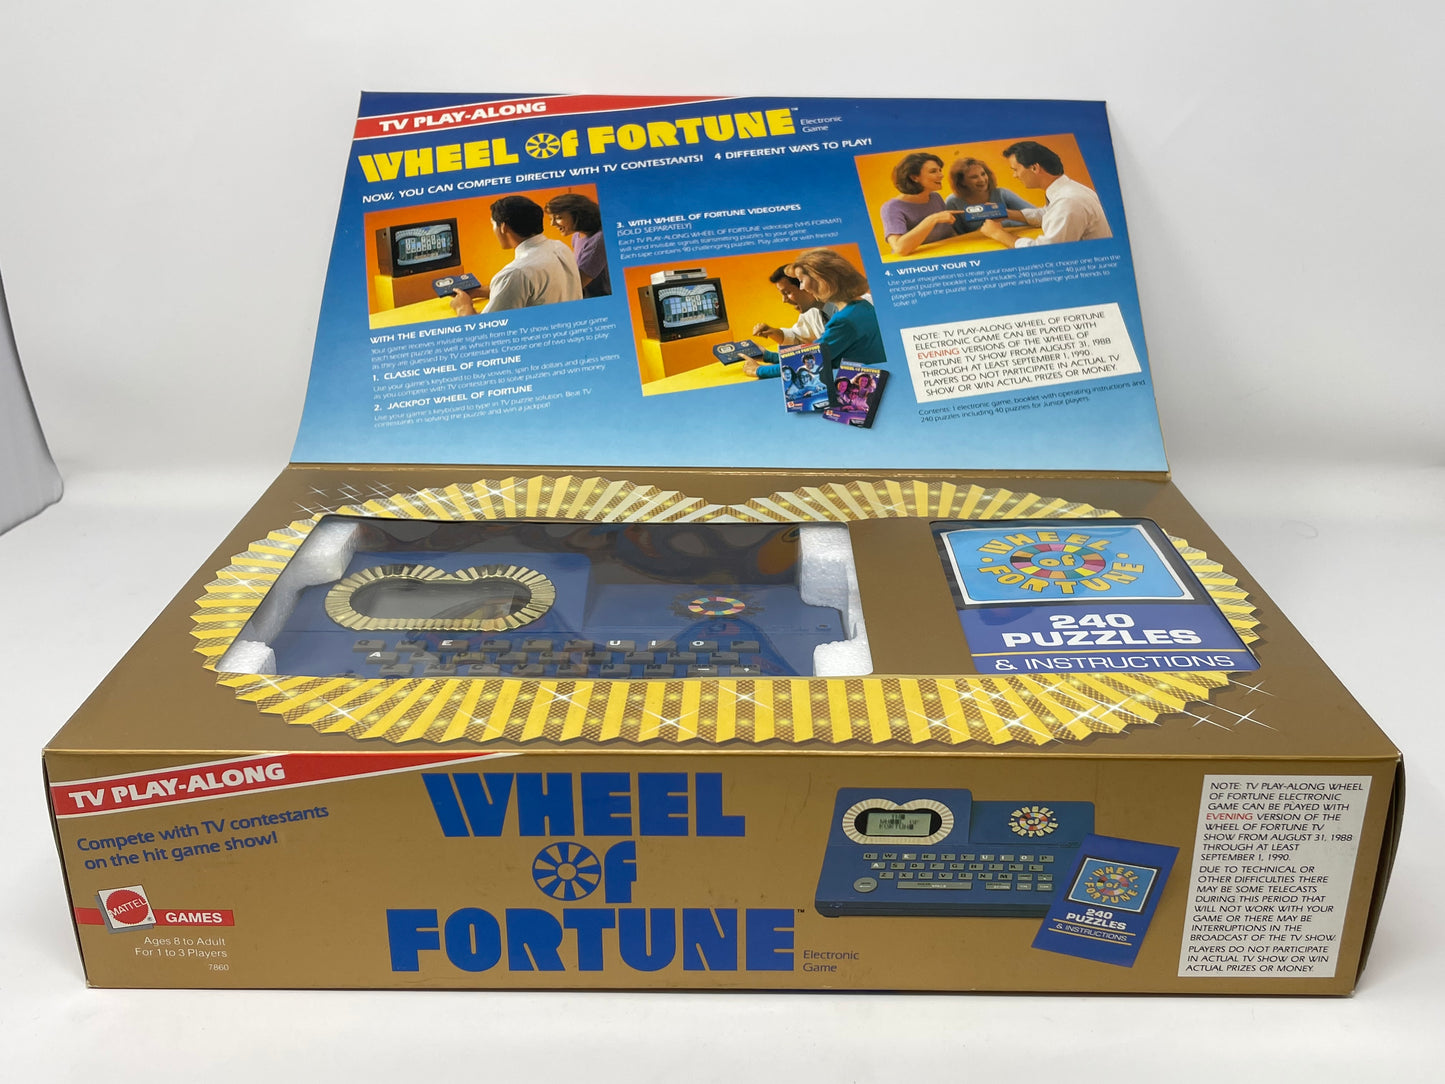 TV PLAY-ALONG WHEEL OF FORTUNE - ELECTRONIC GAME - #7860 - MATTEL GAMES 1988